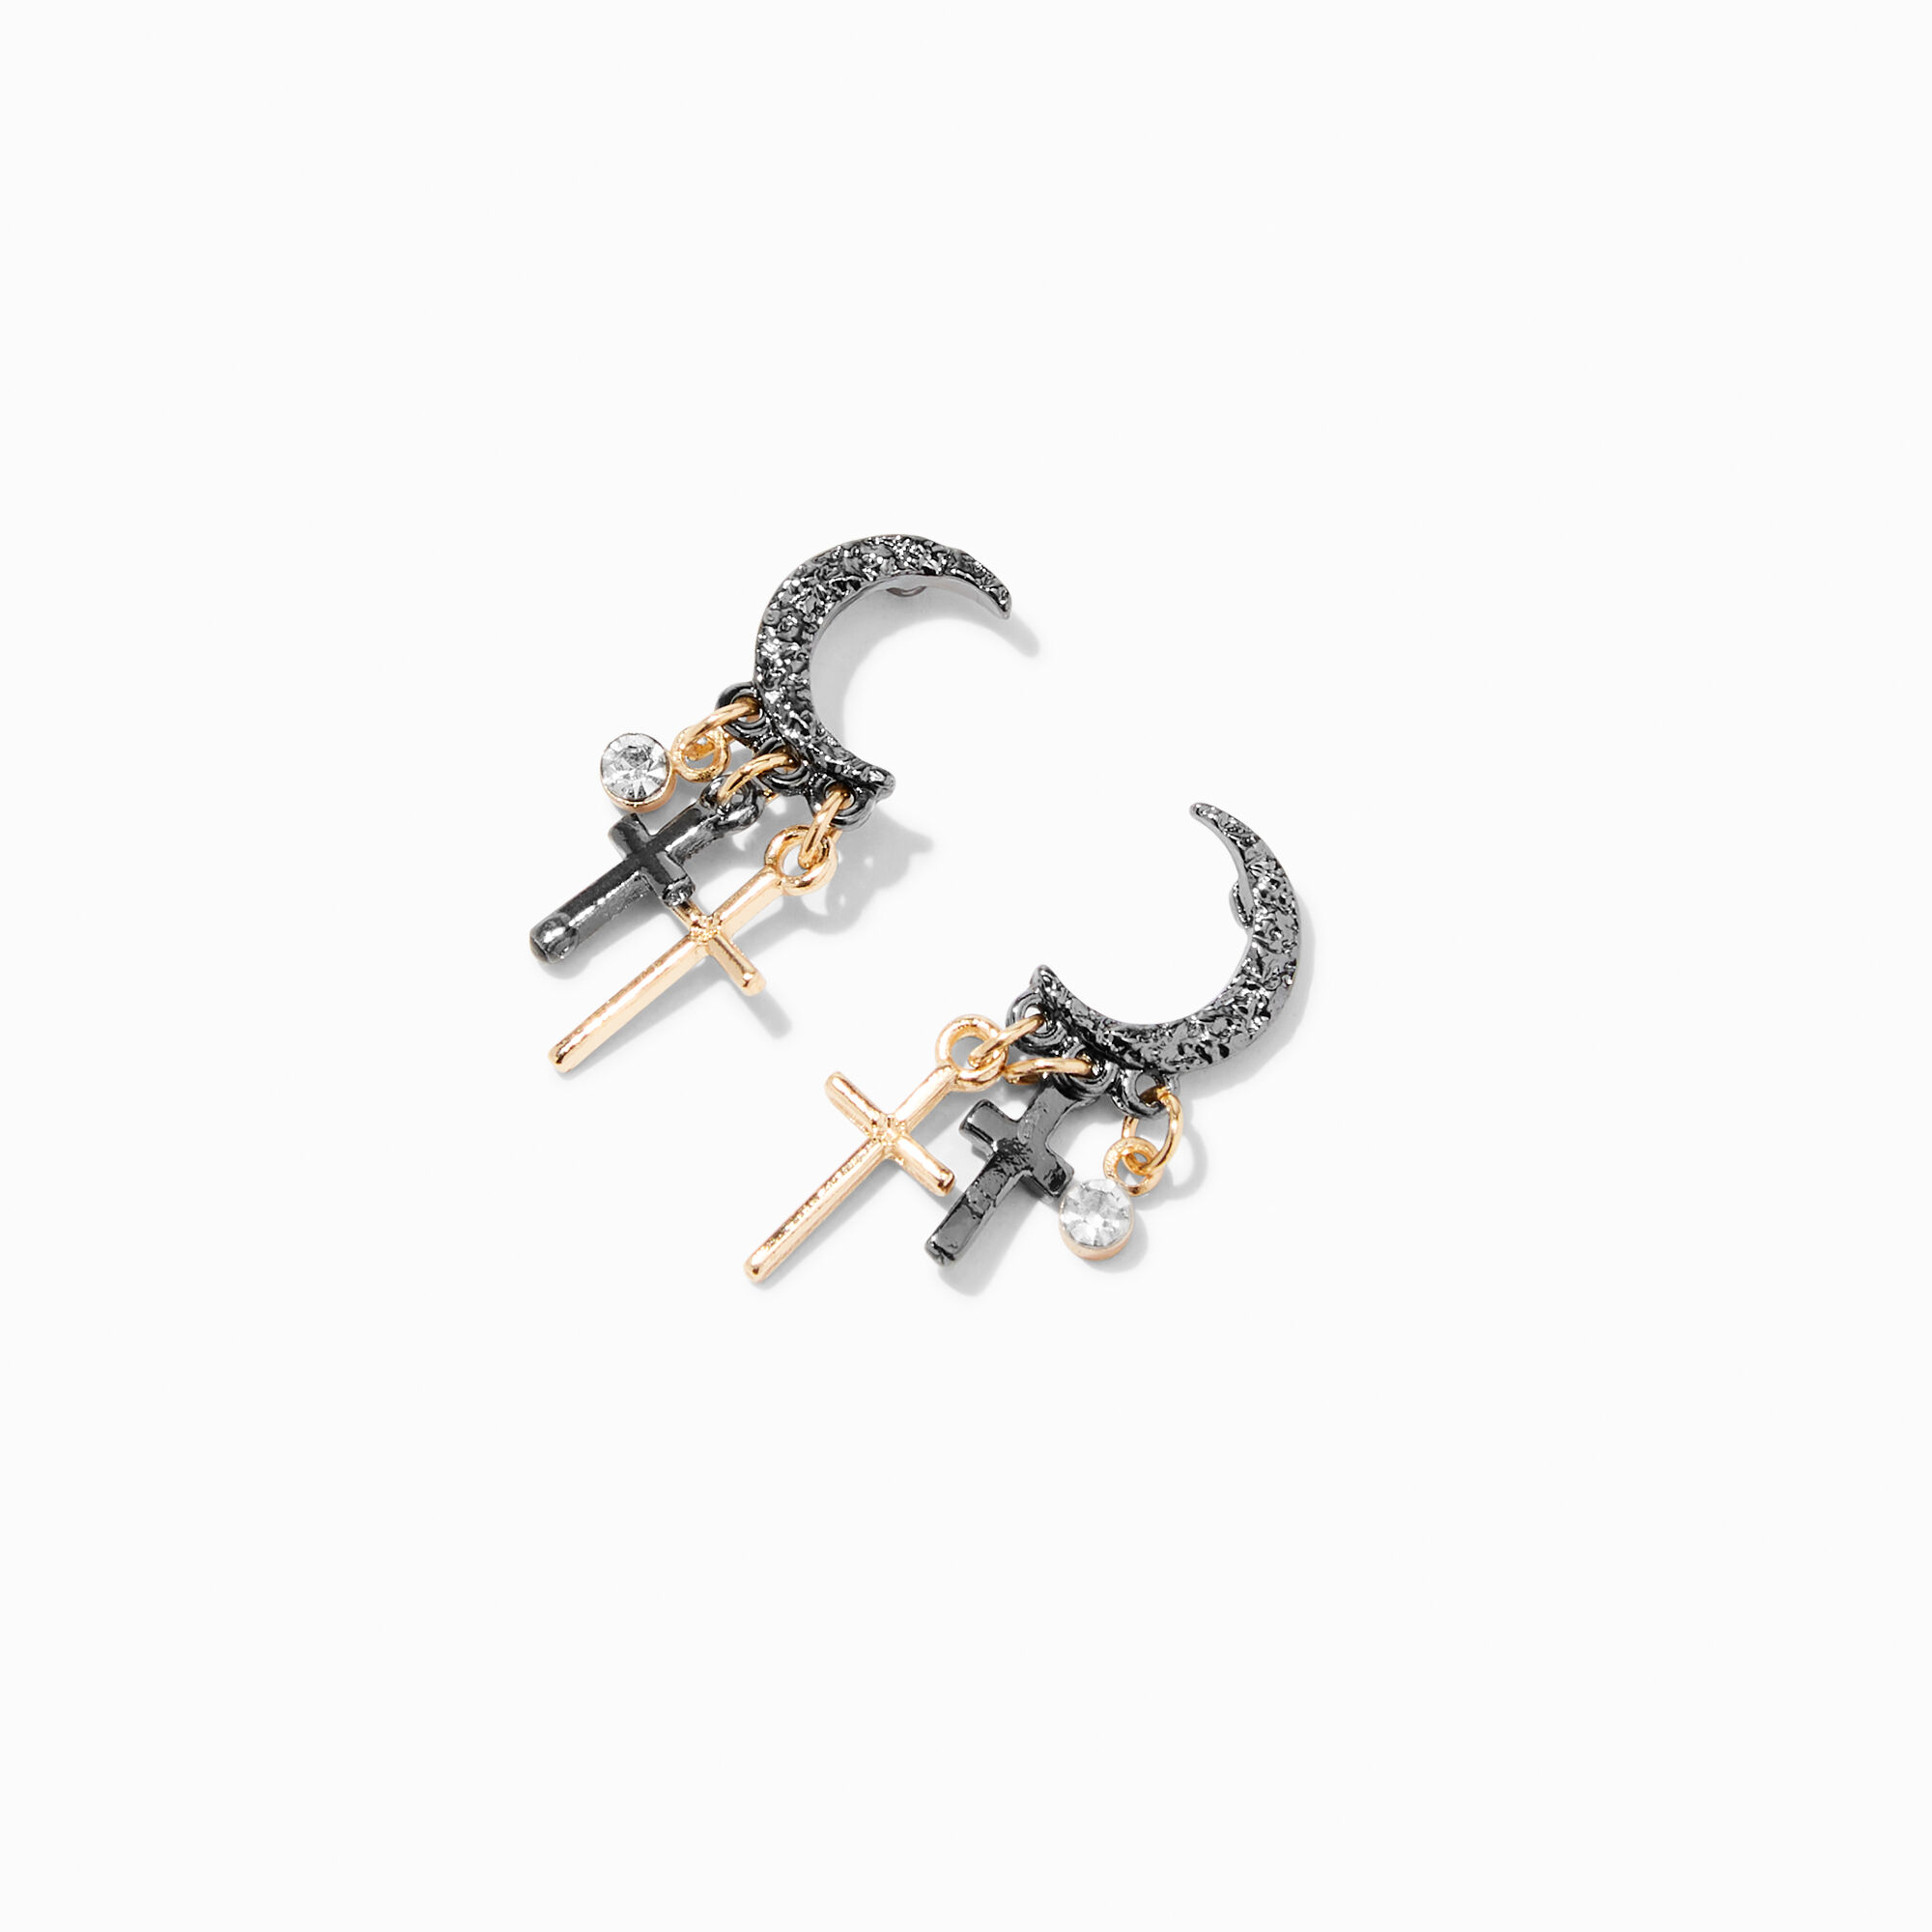 View Claires Mixed Metal 1 Crescent Moon Cross Stud Earrings information